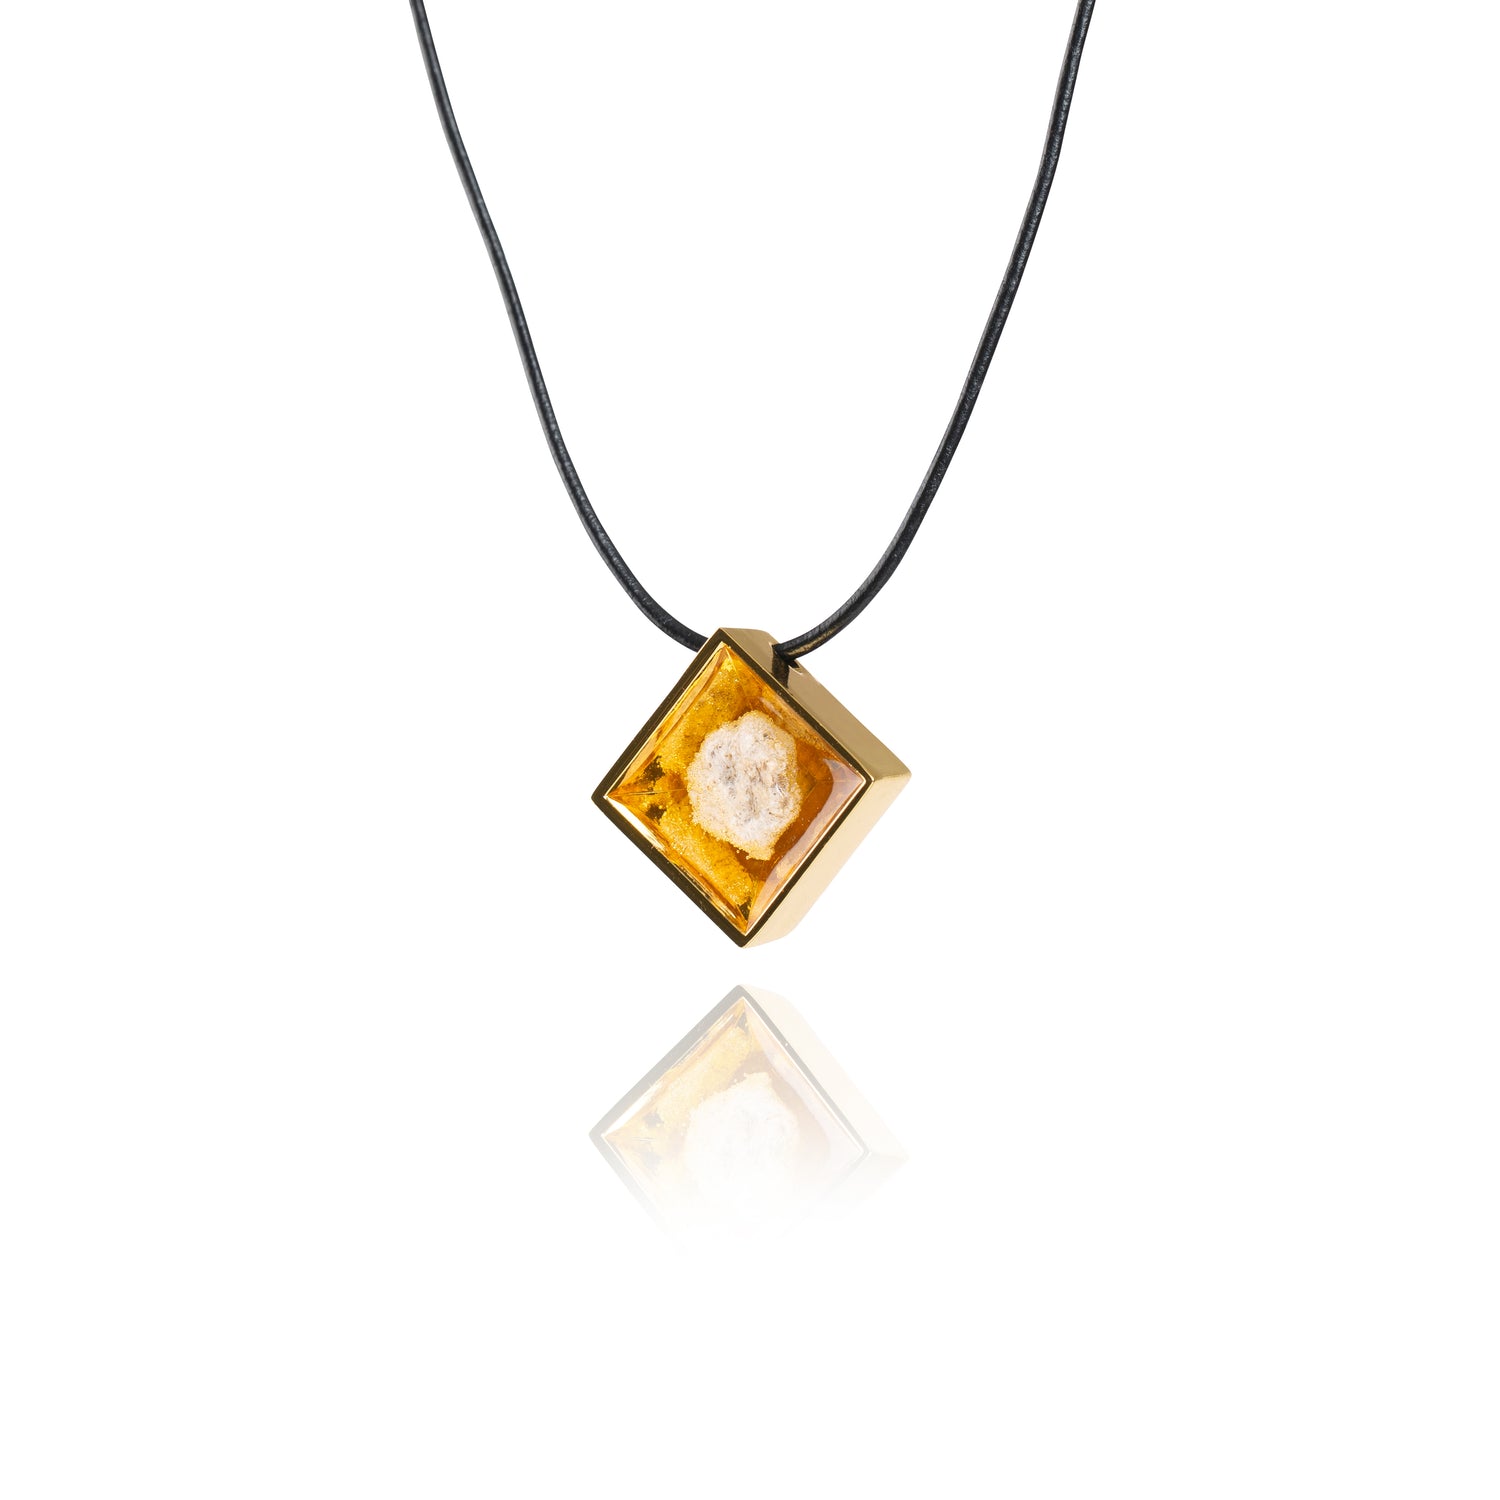 A side view of a small natural tan stone sitting in the middle of a diamond shaped metal pendant in a gold color. The pendant is hanging on a black leather necklace.